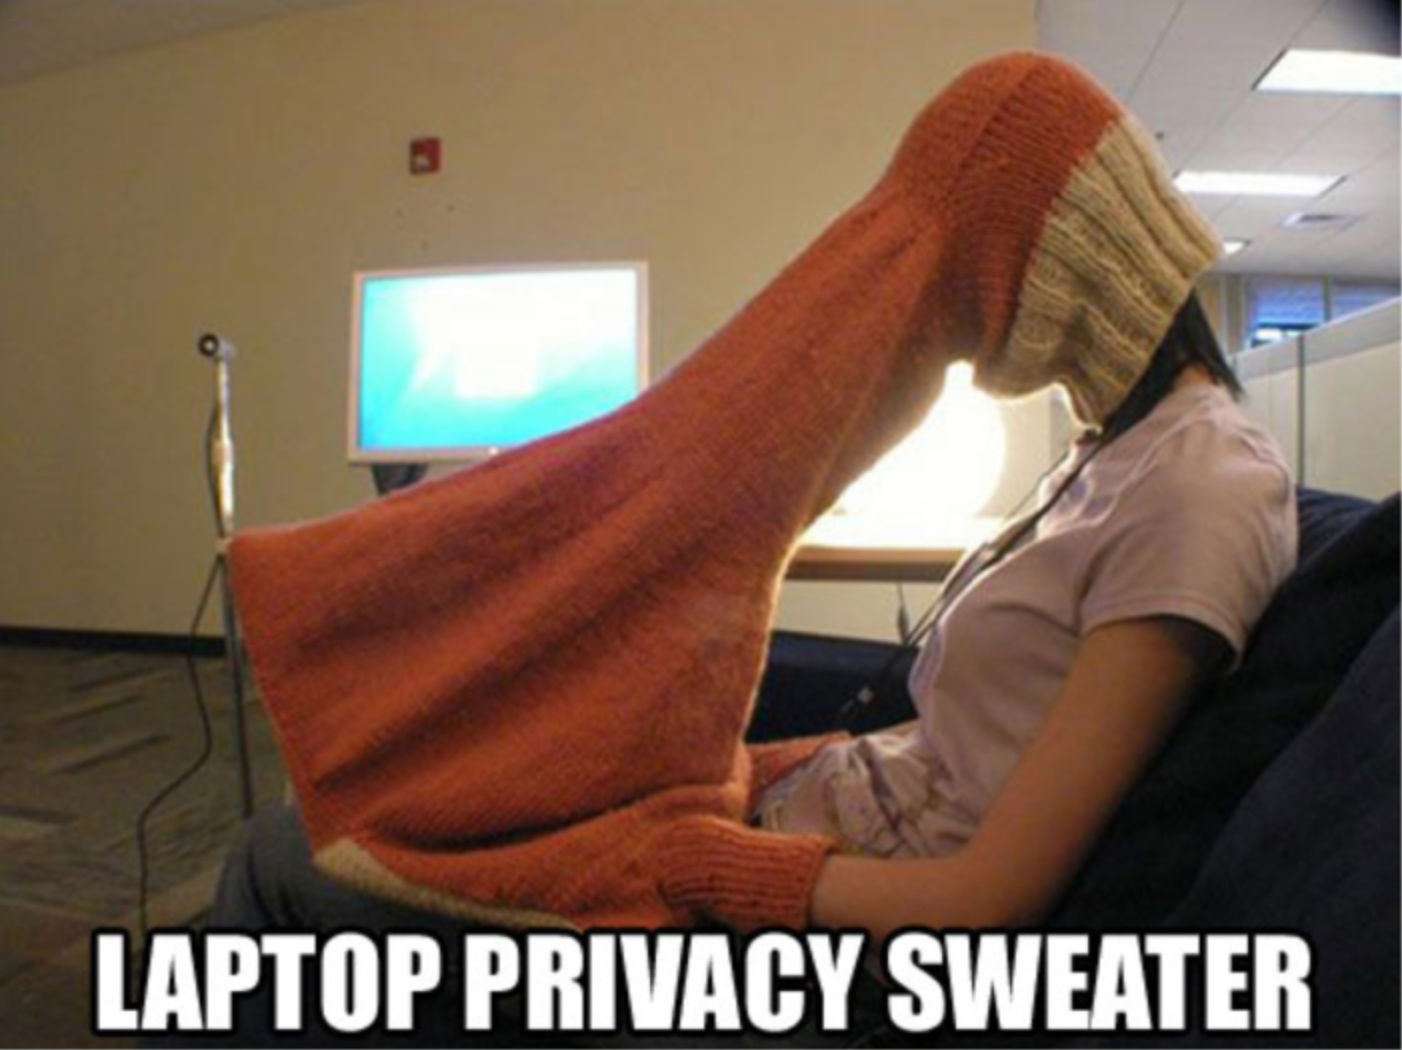 The laptop privacy sweater may cover a user’s computer screen but it won’t protect against the latest methods that cyberattackers are using against physician offices and health care systems, said Jeffery Daigrepont, senior vice president for health information technology for Coker Group, physician advisory group based in Alpharetta, Georgia. Daigrepont used the illustration in his presentation “Confessions of a Hacker: How Cyberattackers Have Targeted Remote Workers,” as part of 2022 Medical Practice Excellence Leaders Conference of the Medical Group Management Association.